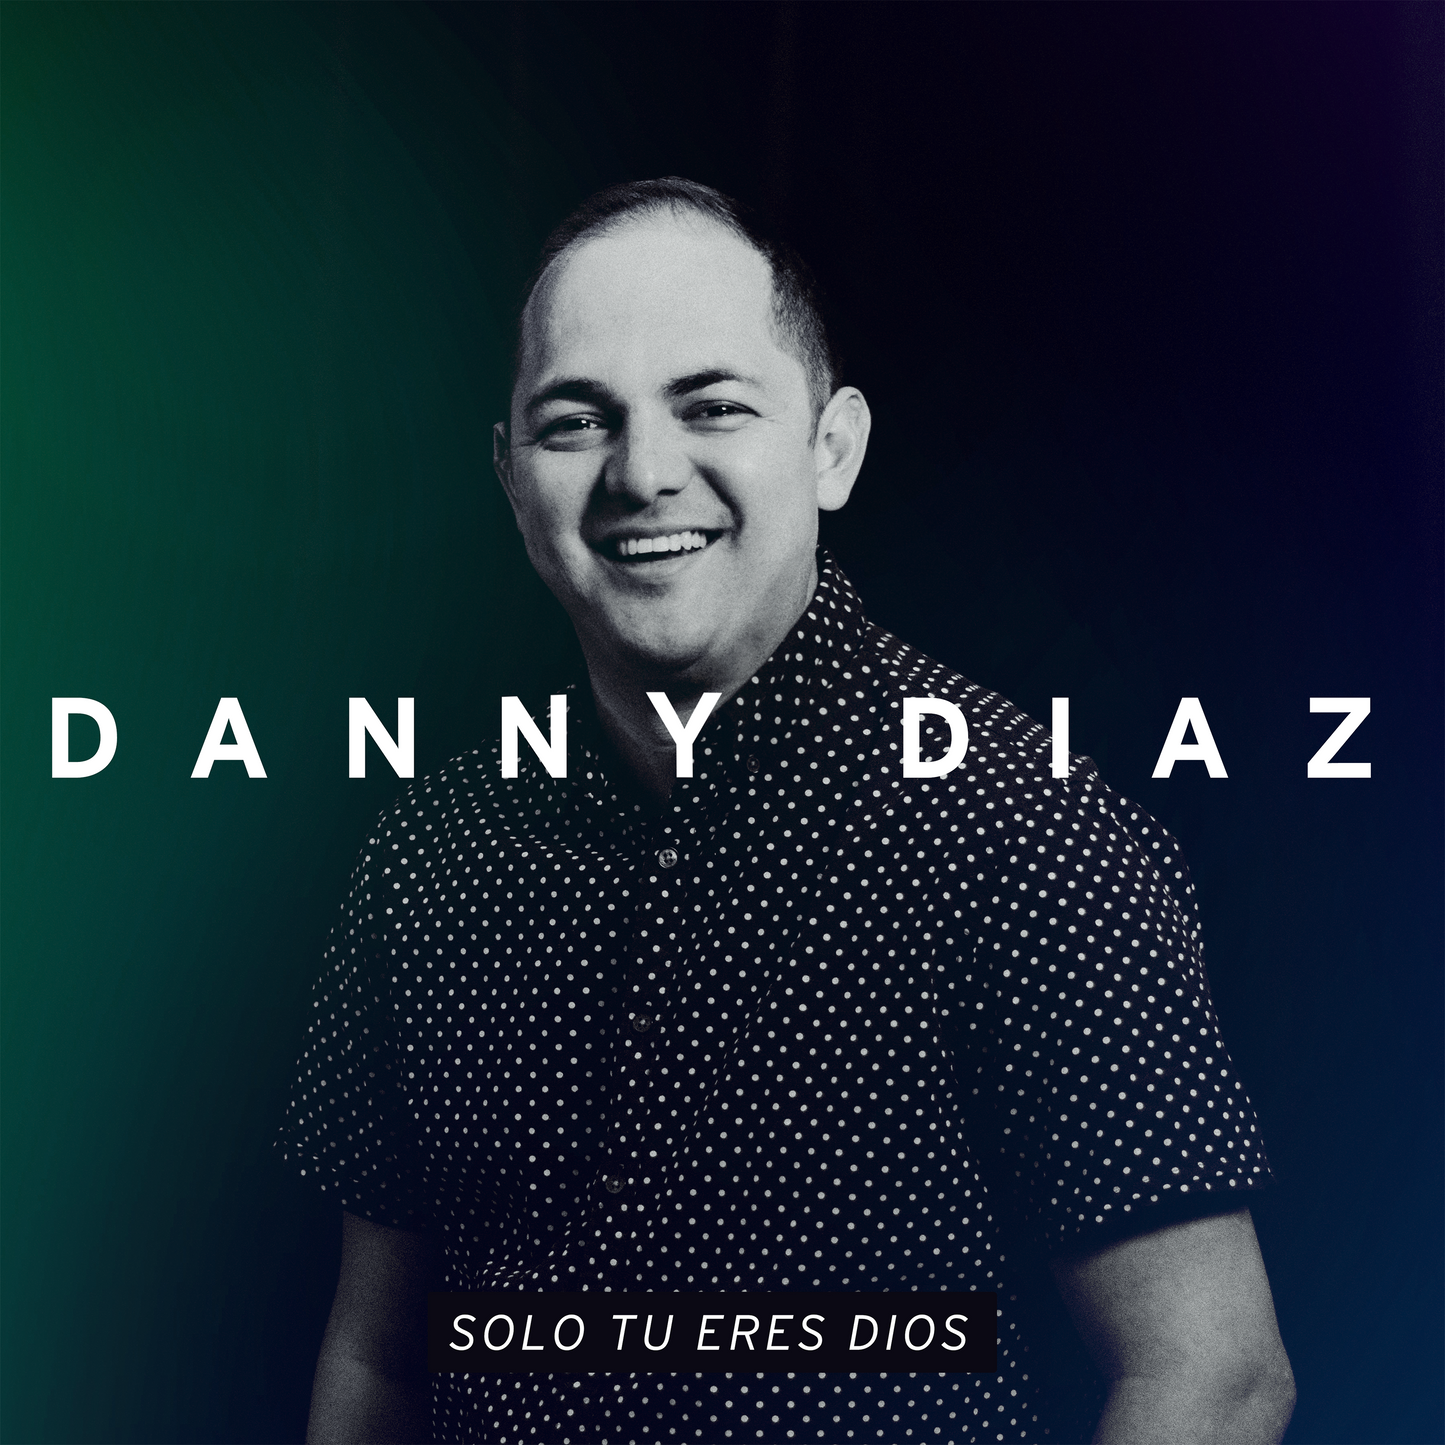 Only You Are God (Feat. Tercer Cielo) - Danny Diaz 